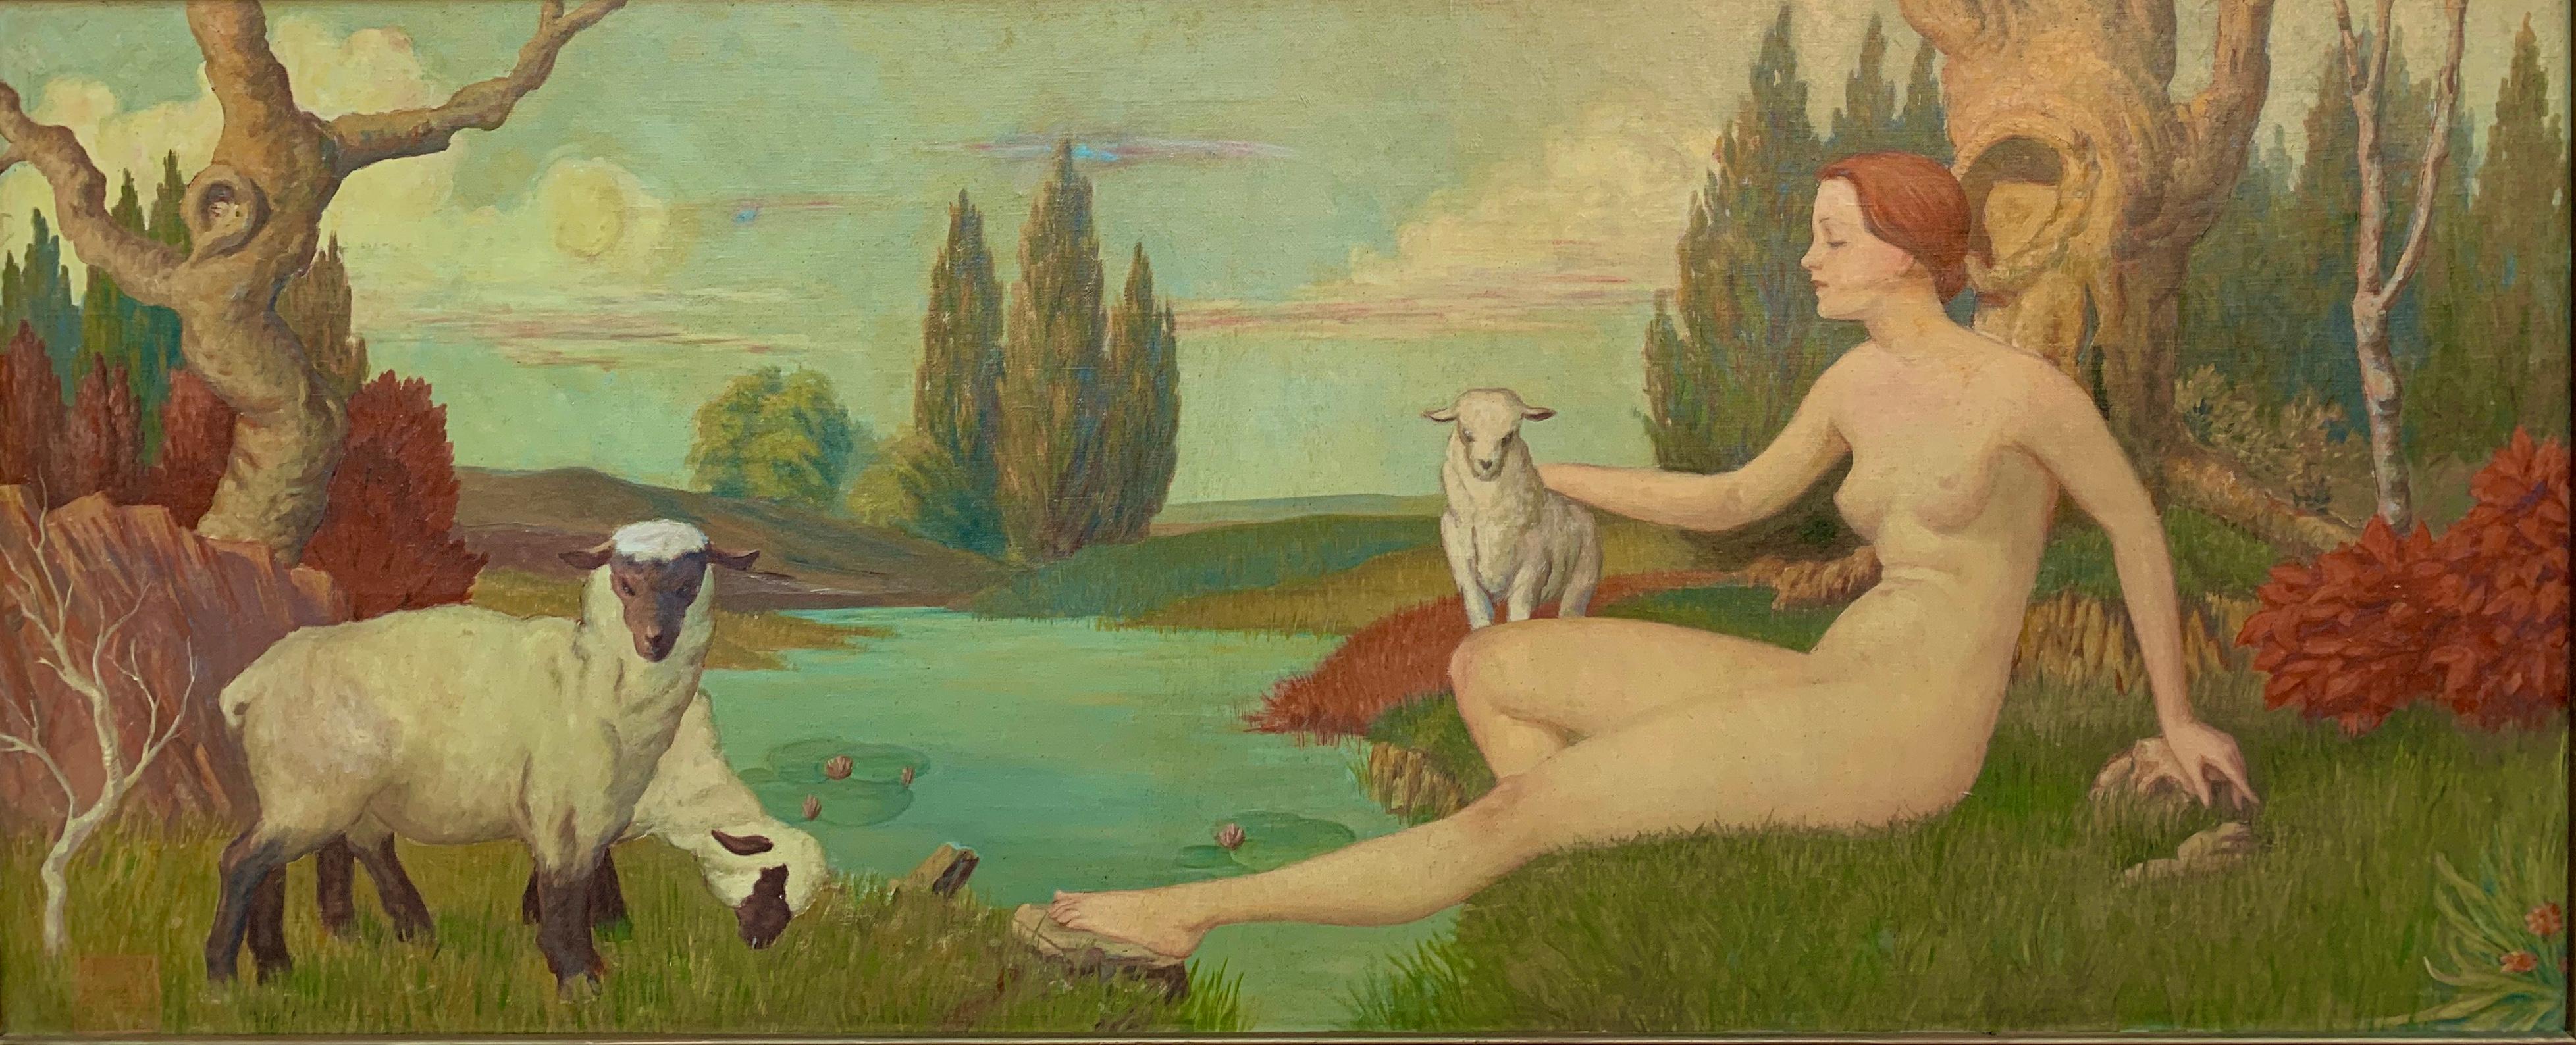 Andrew Benjamin Kennedy Portrait Painting - American Art Deco Mural Sensual Red Head Nude Woman in a Landscape with Sheep